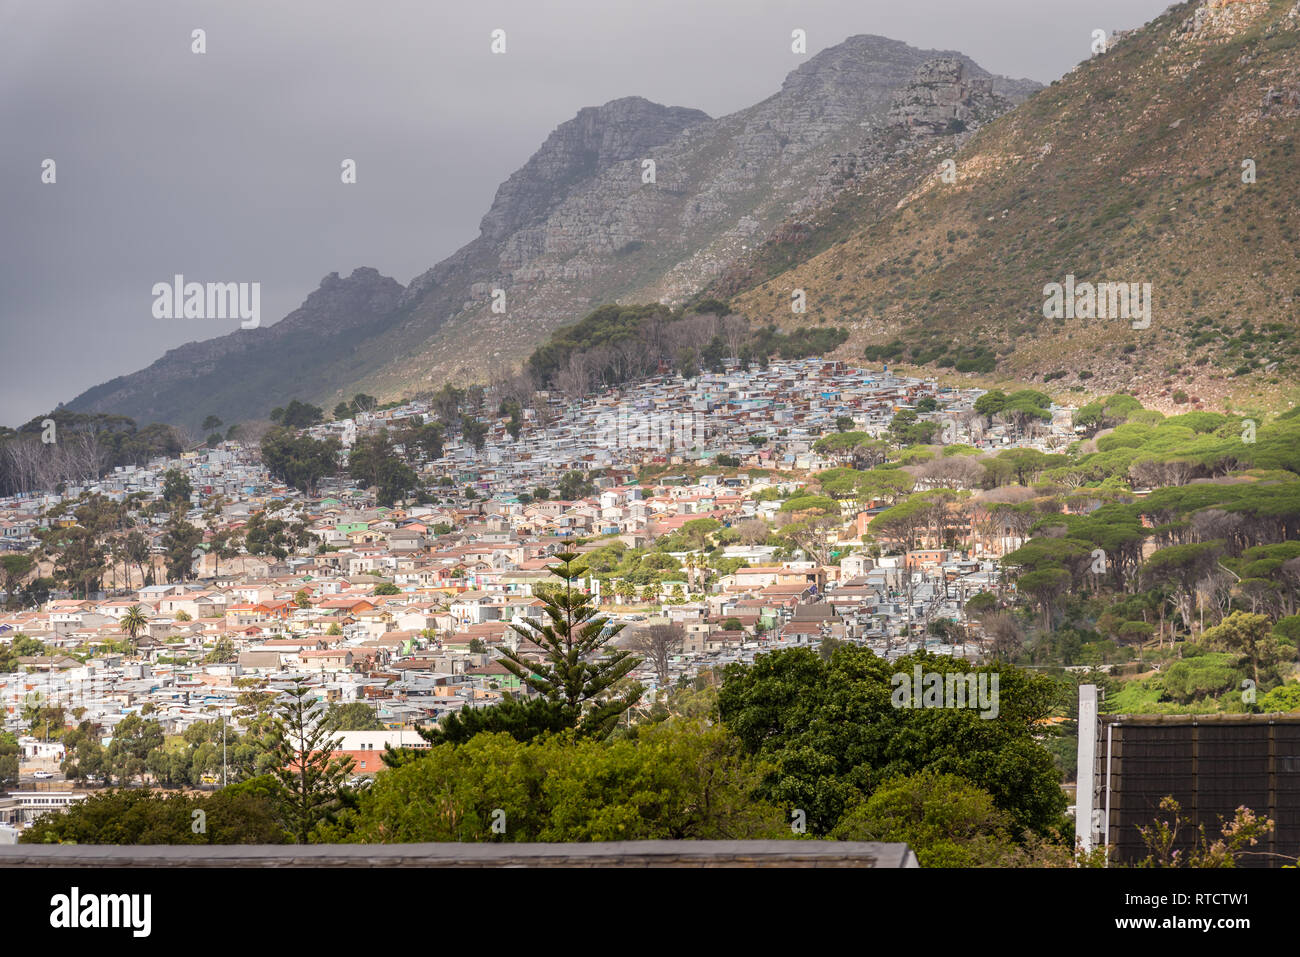 Township on the hill, Cape Town, South Africa Stock Photo